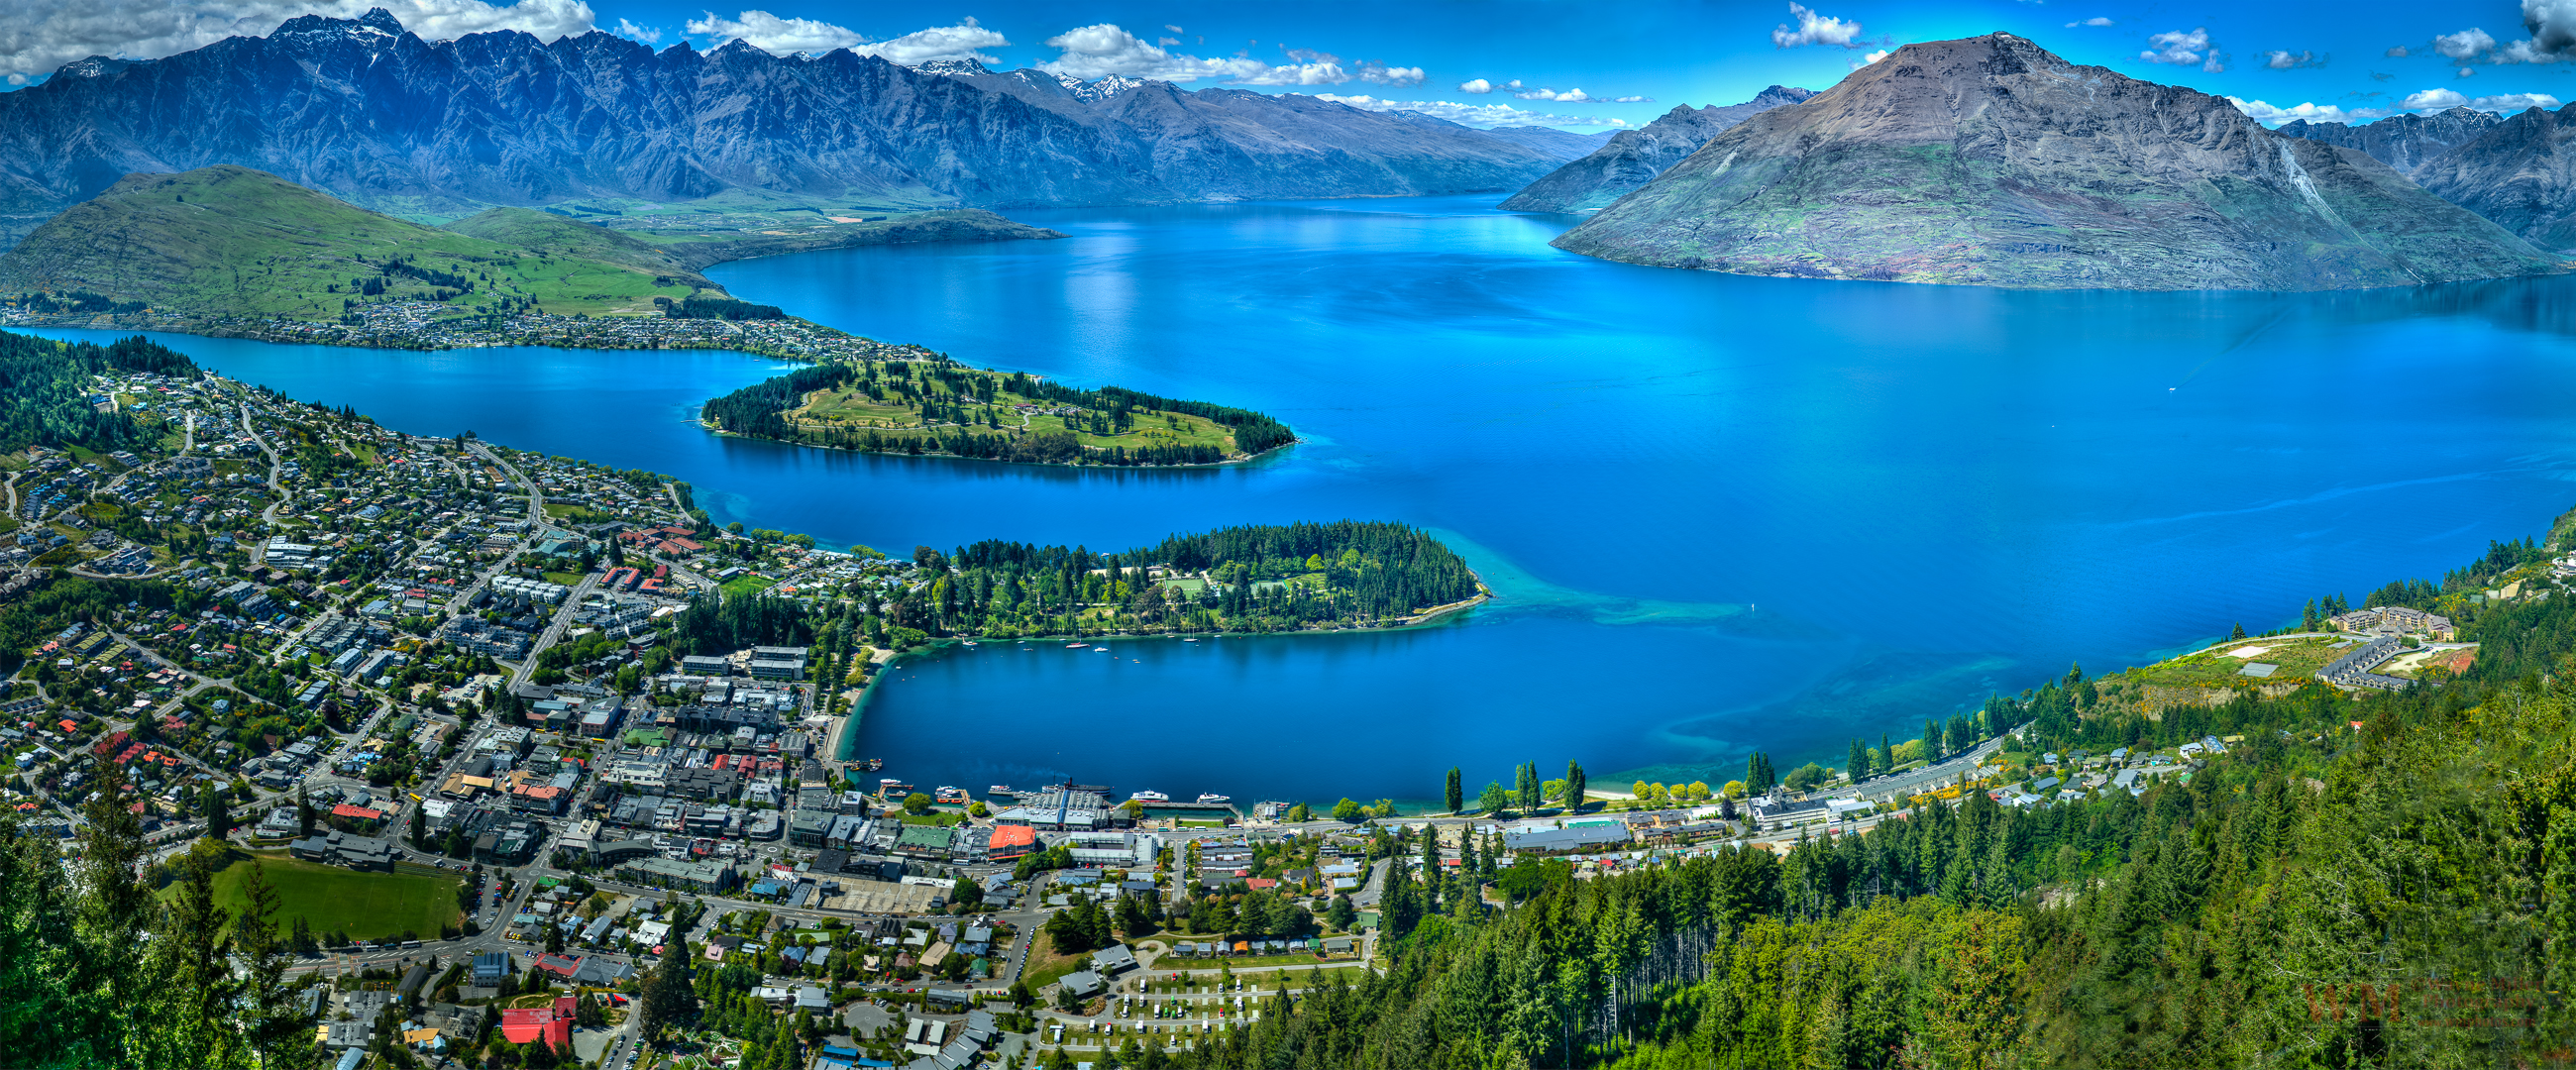 Queenstown (New Zealand) Backgrounds, Compatible - PC, Mobile, Gadgets| 2600x1080 px